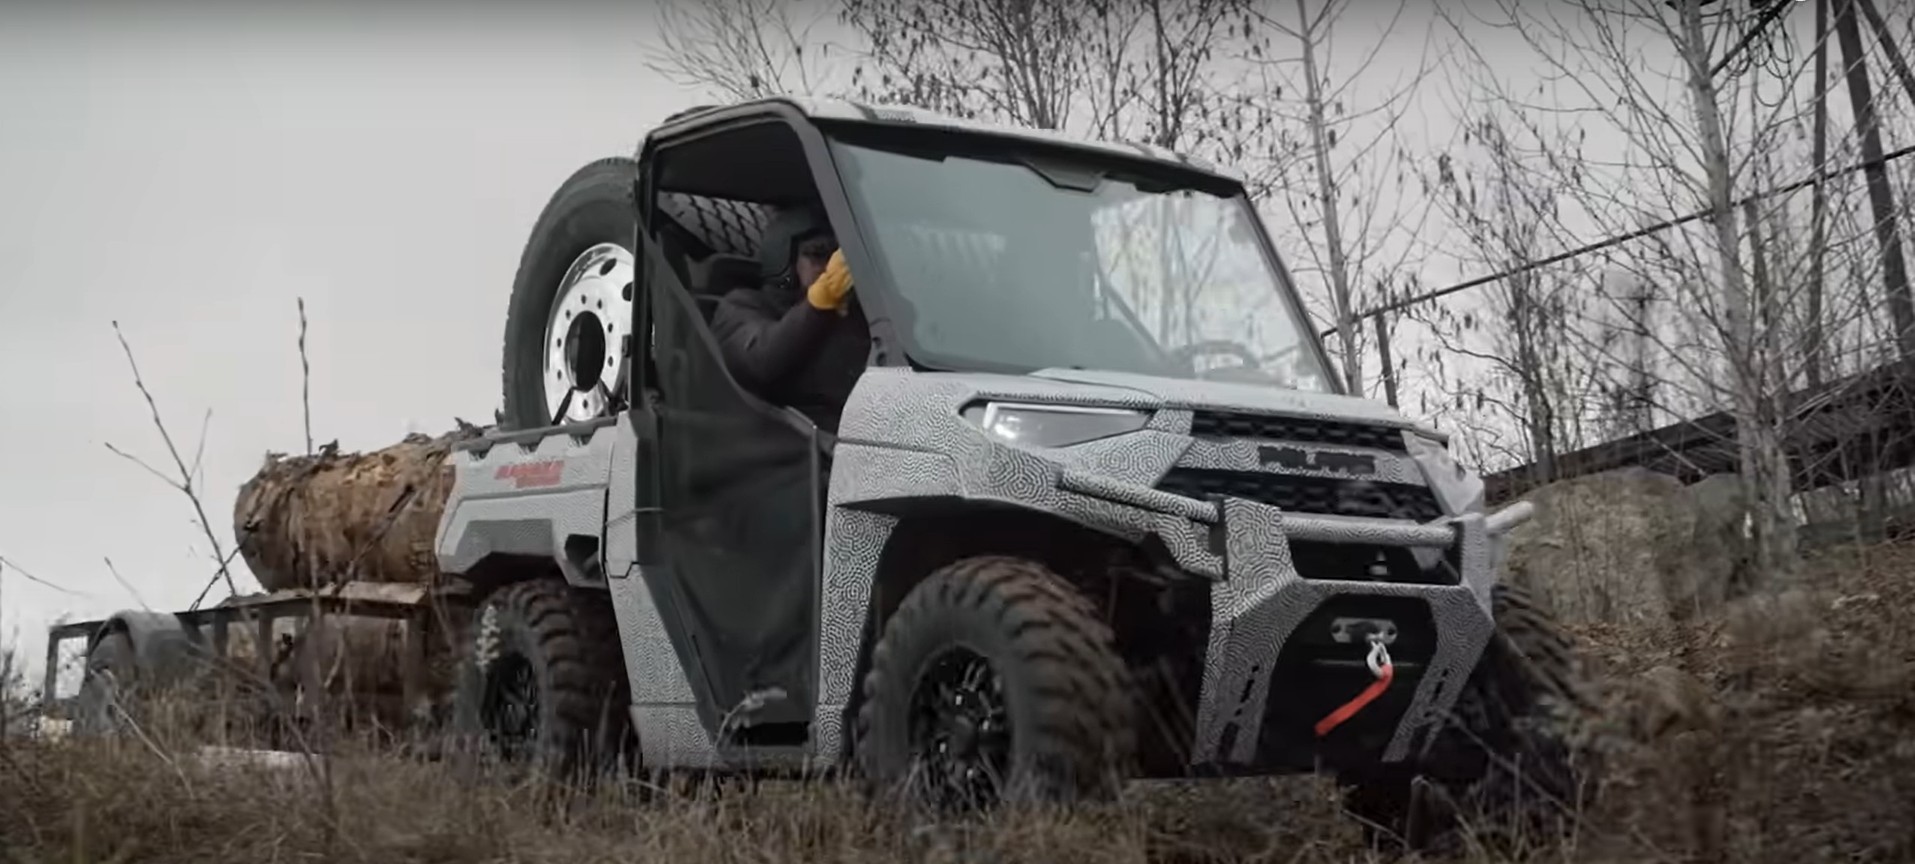 Future Polaris Ranger Electric UTV Ditches the Engine, Stays in Beast